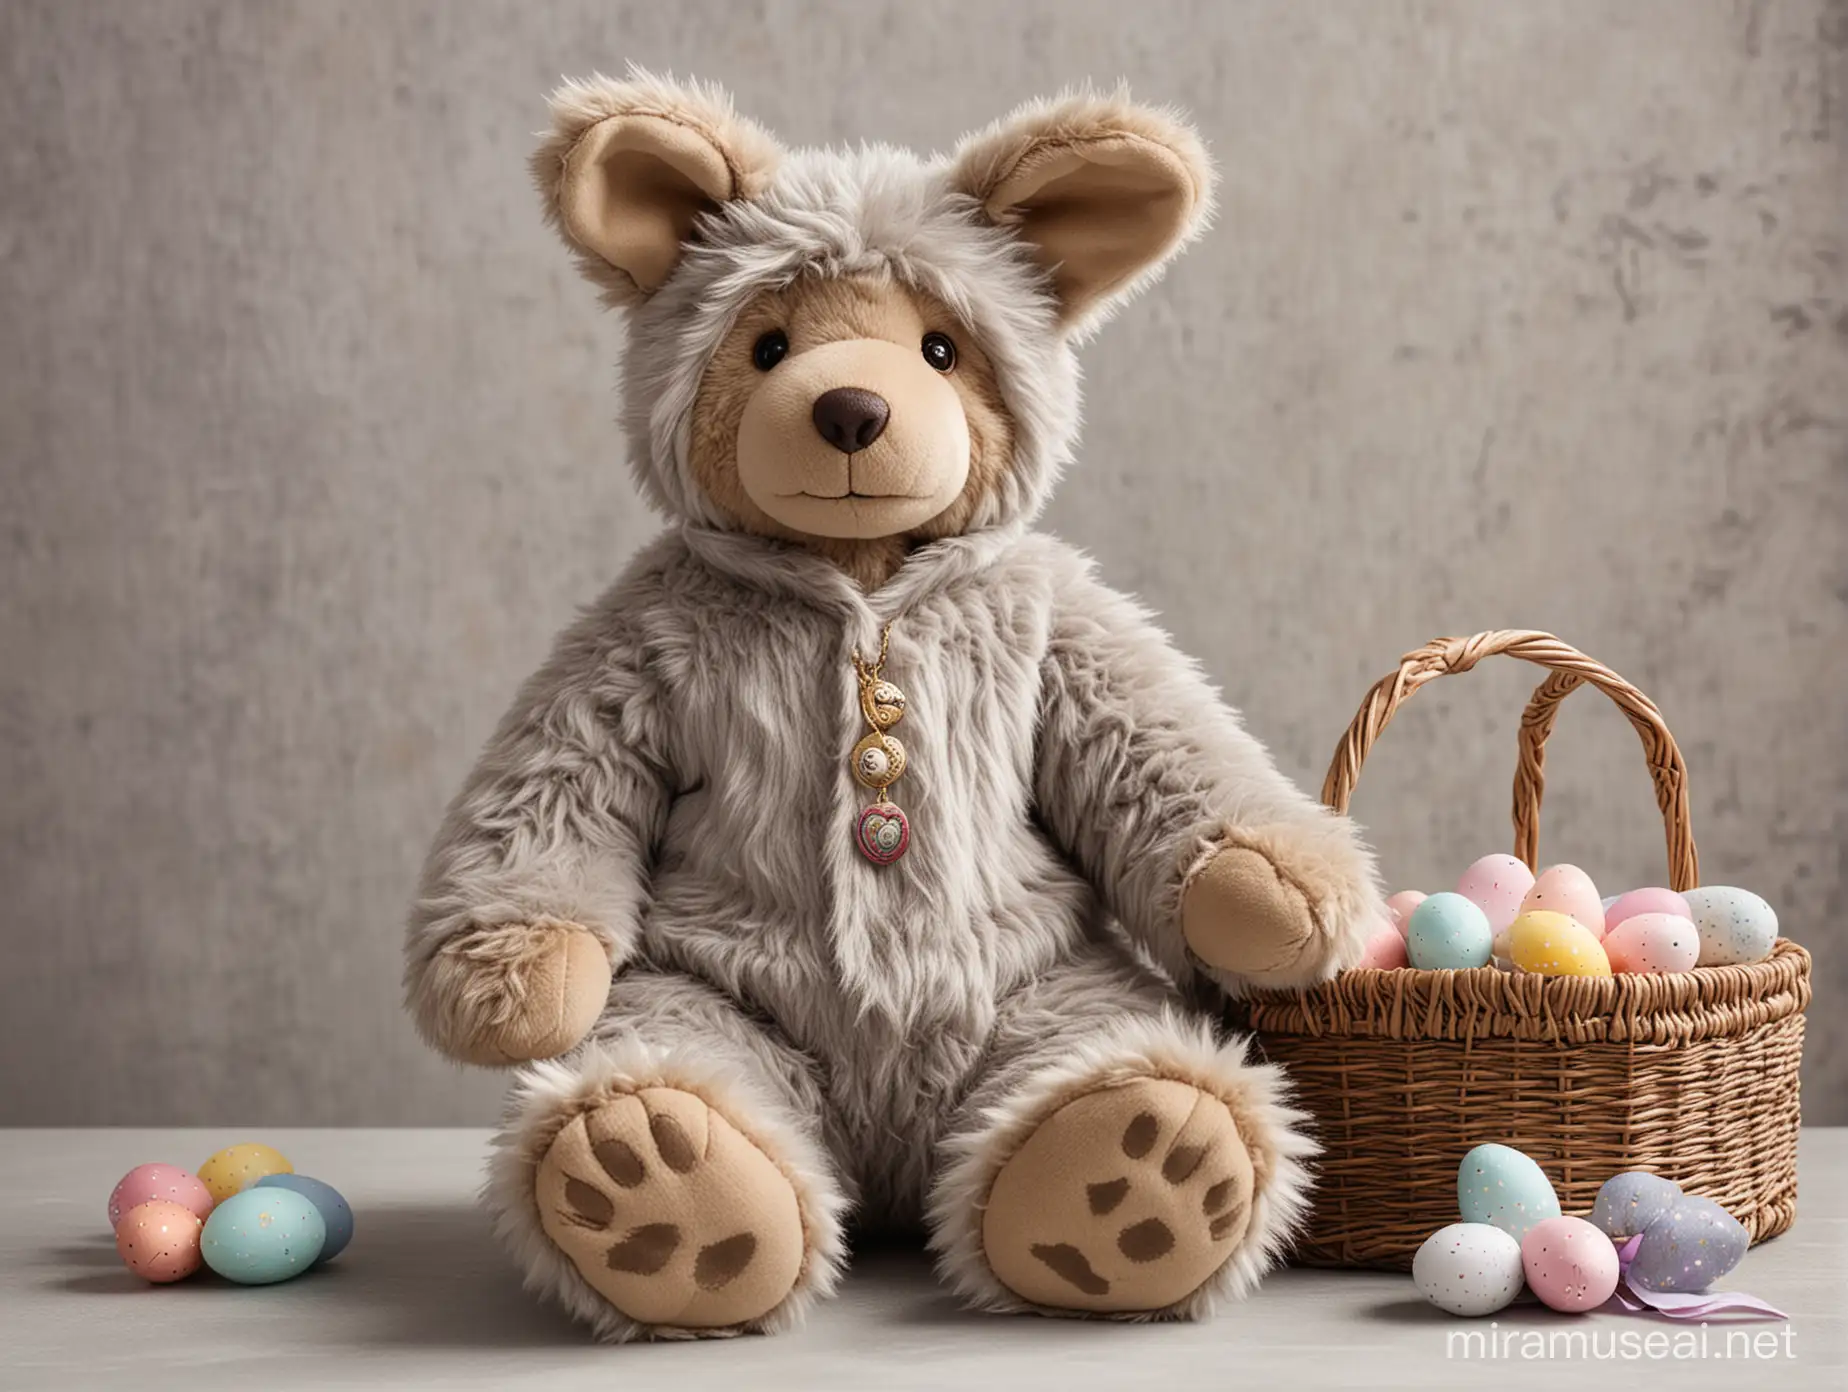 A teddy bear with medium long grey fur and with a medallion of a paw print on his neck, is dressed in an separate, furry,  Easter bunny suit, with a small wicker basket full of Easter eggs.